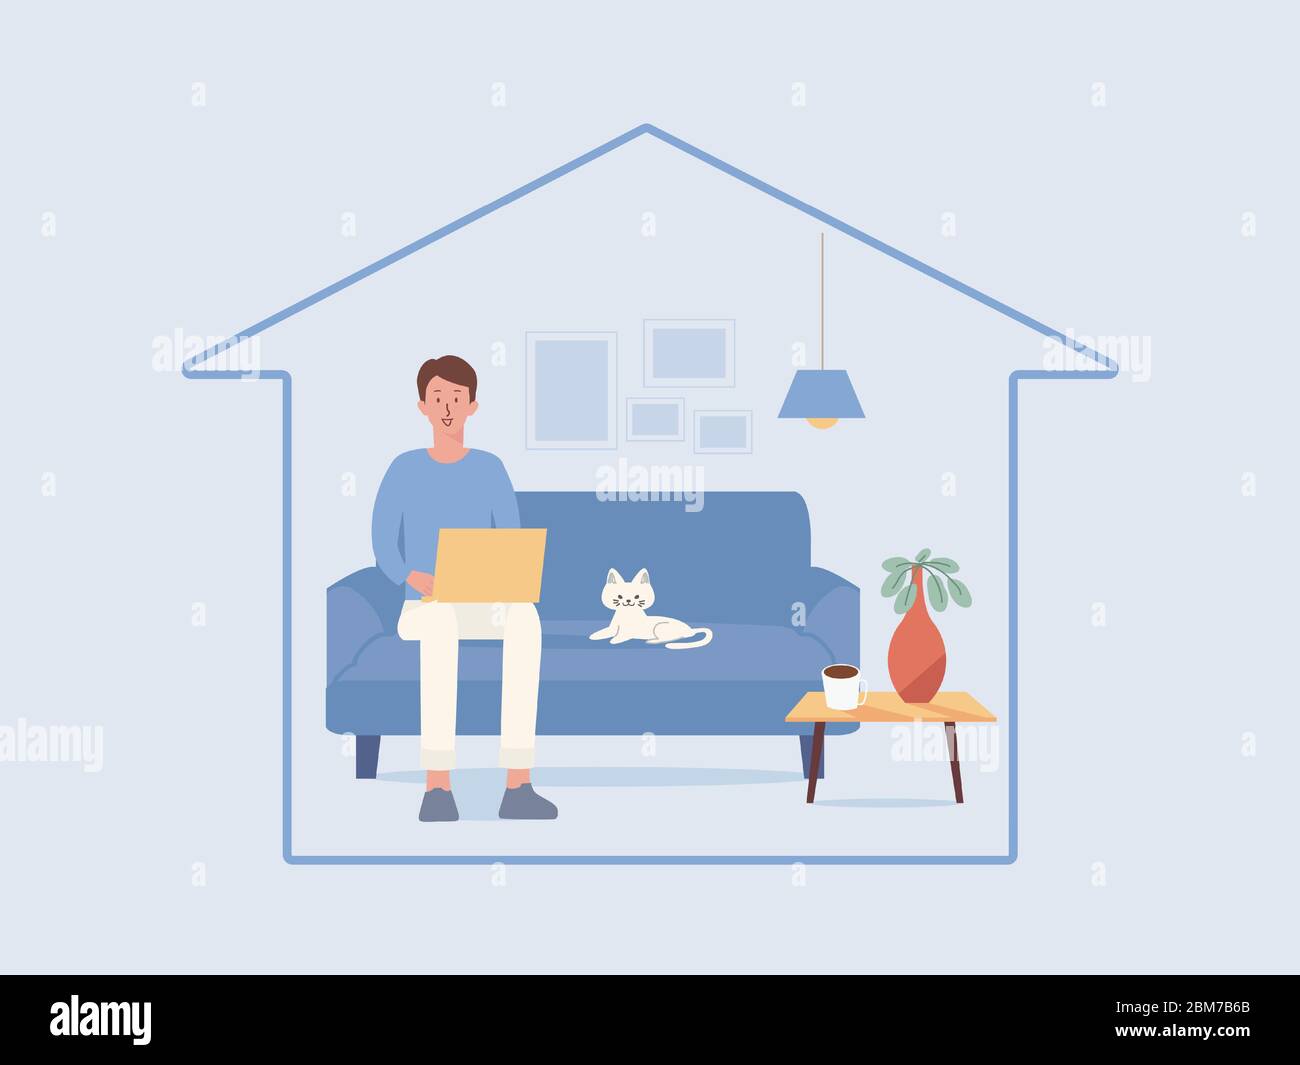 Man working online with a computer laptop on the sofa in the living room of the home, a cat lying near him. Illustration about stay home. Stock Vector